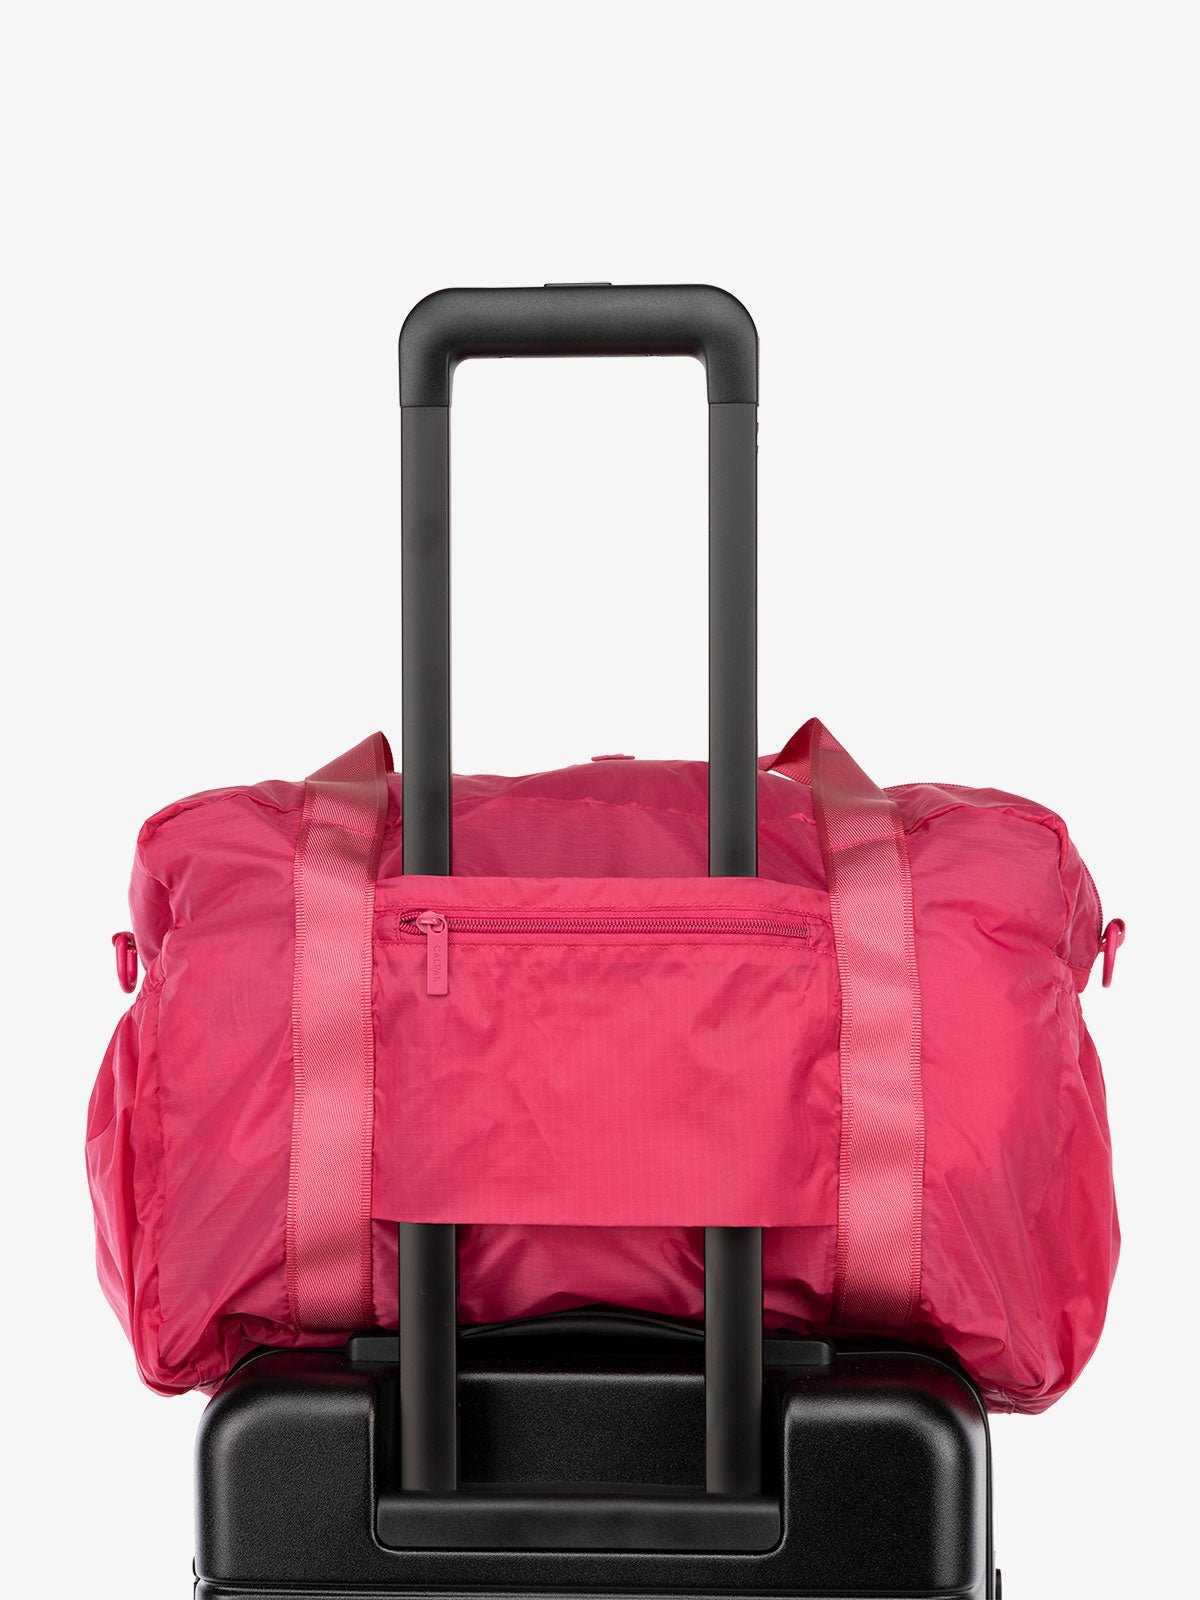 CALPAK Compakt nylon duffle bag with trolley sleeve in pink